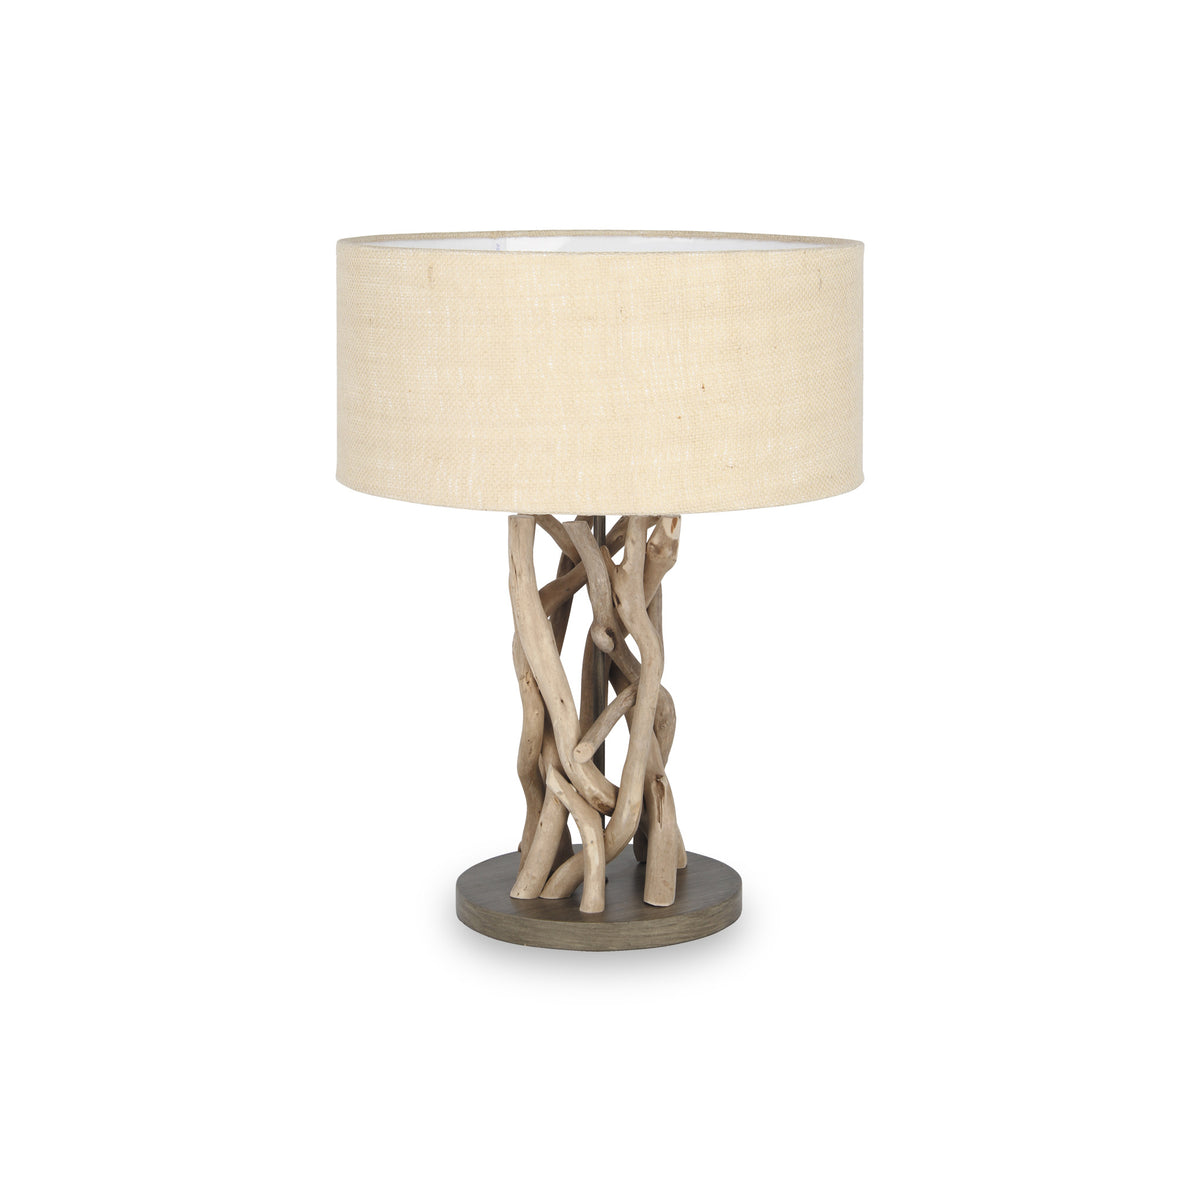 Derna Driftwood and Natural Jute Table Lamp from Roseland Furniture